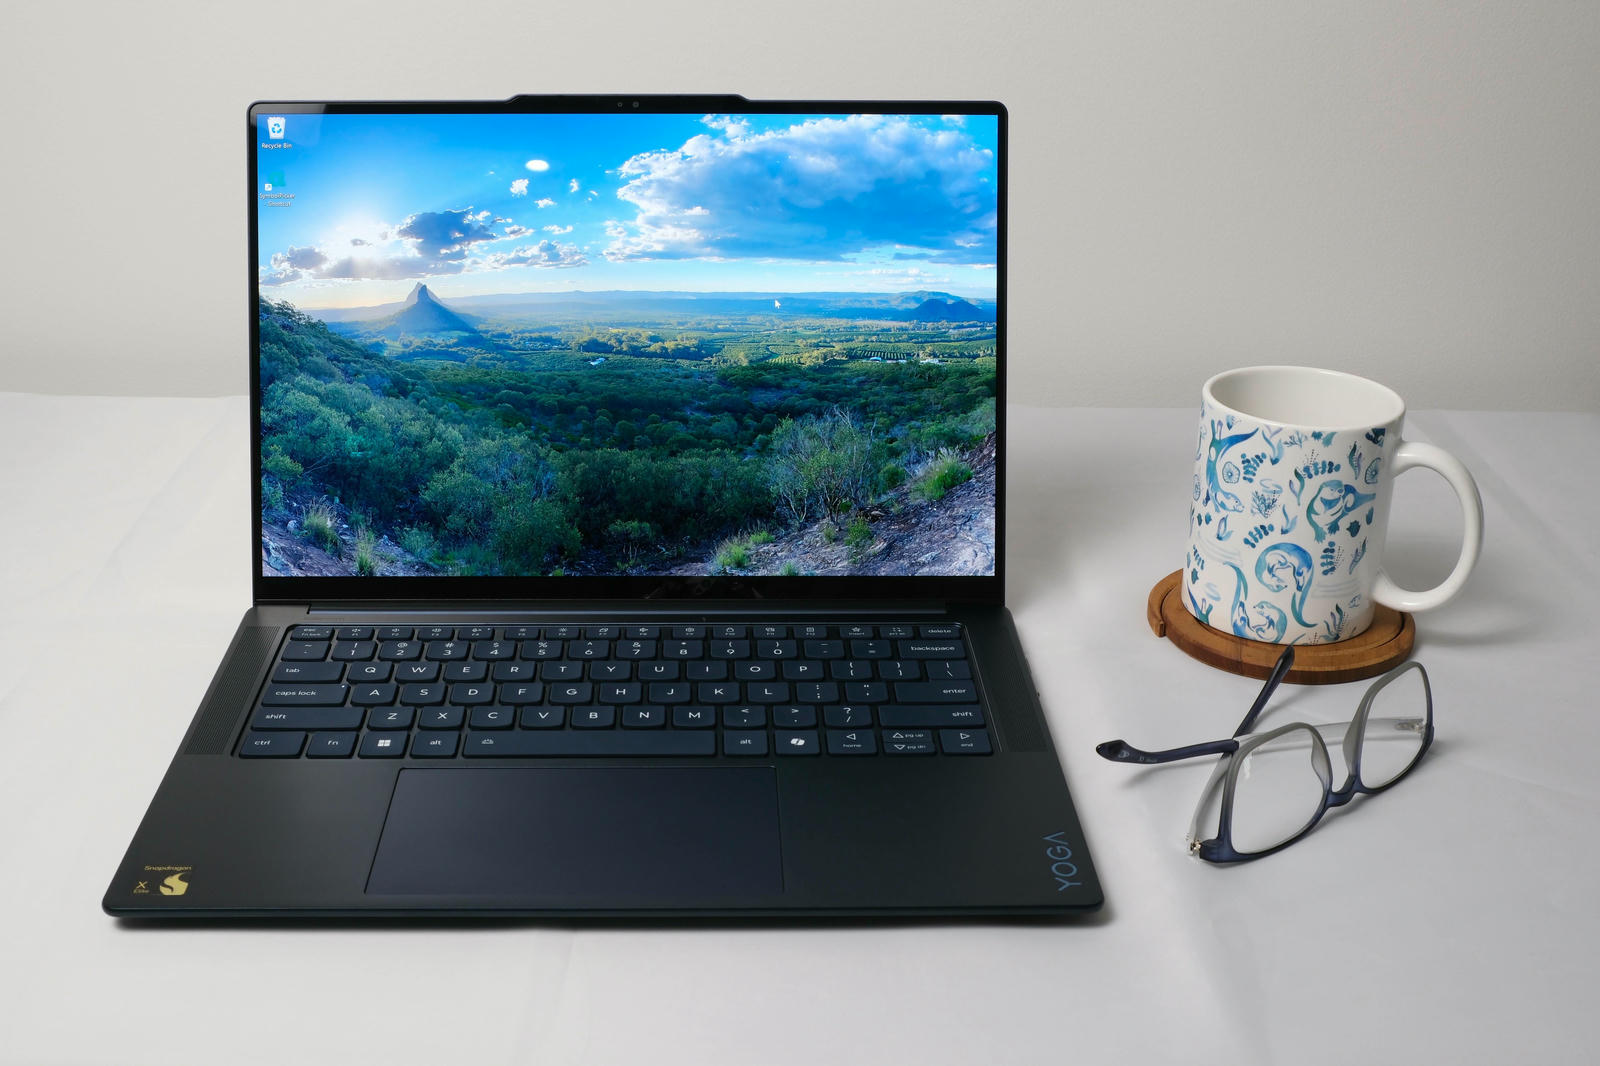 Photo of the Yoga 7x laptop open on a desk showing the Glass House Mountains on the desktop. To the right of the laptop is a coffee mug and a pair of glasses.